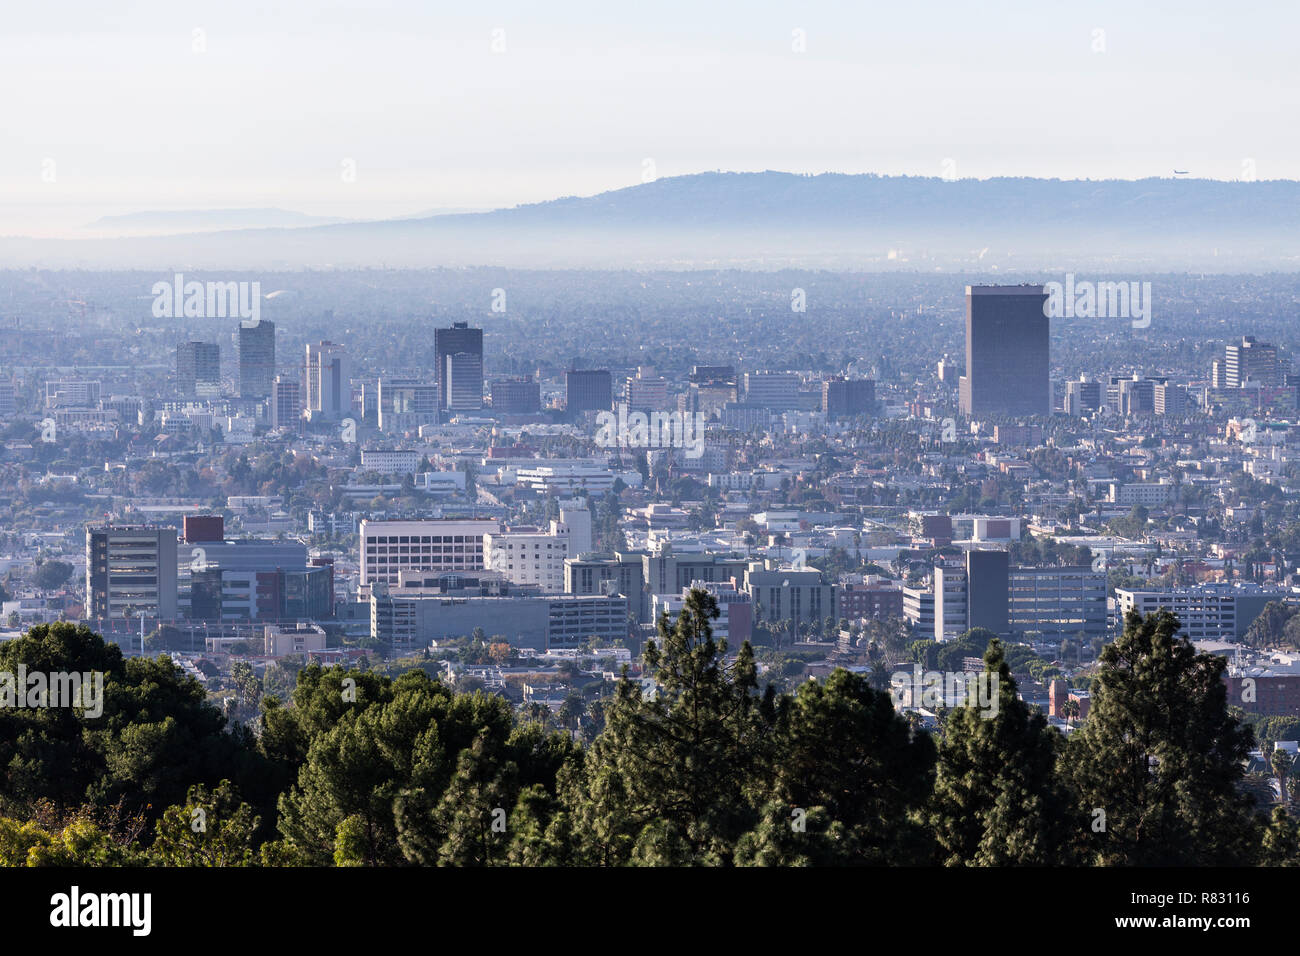 Morning skyline view of Los Angeles Mid City from popular Griffith Park near Hollywood, California. Stock Photo